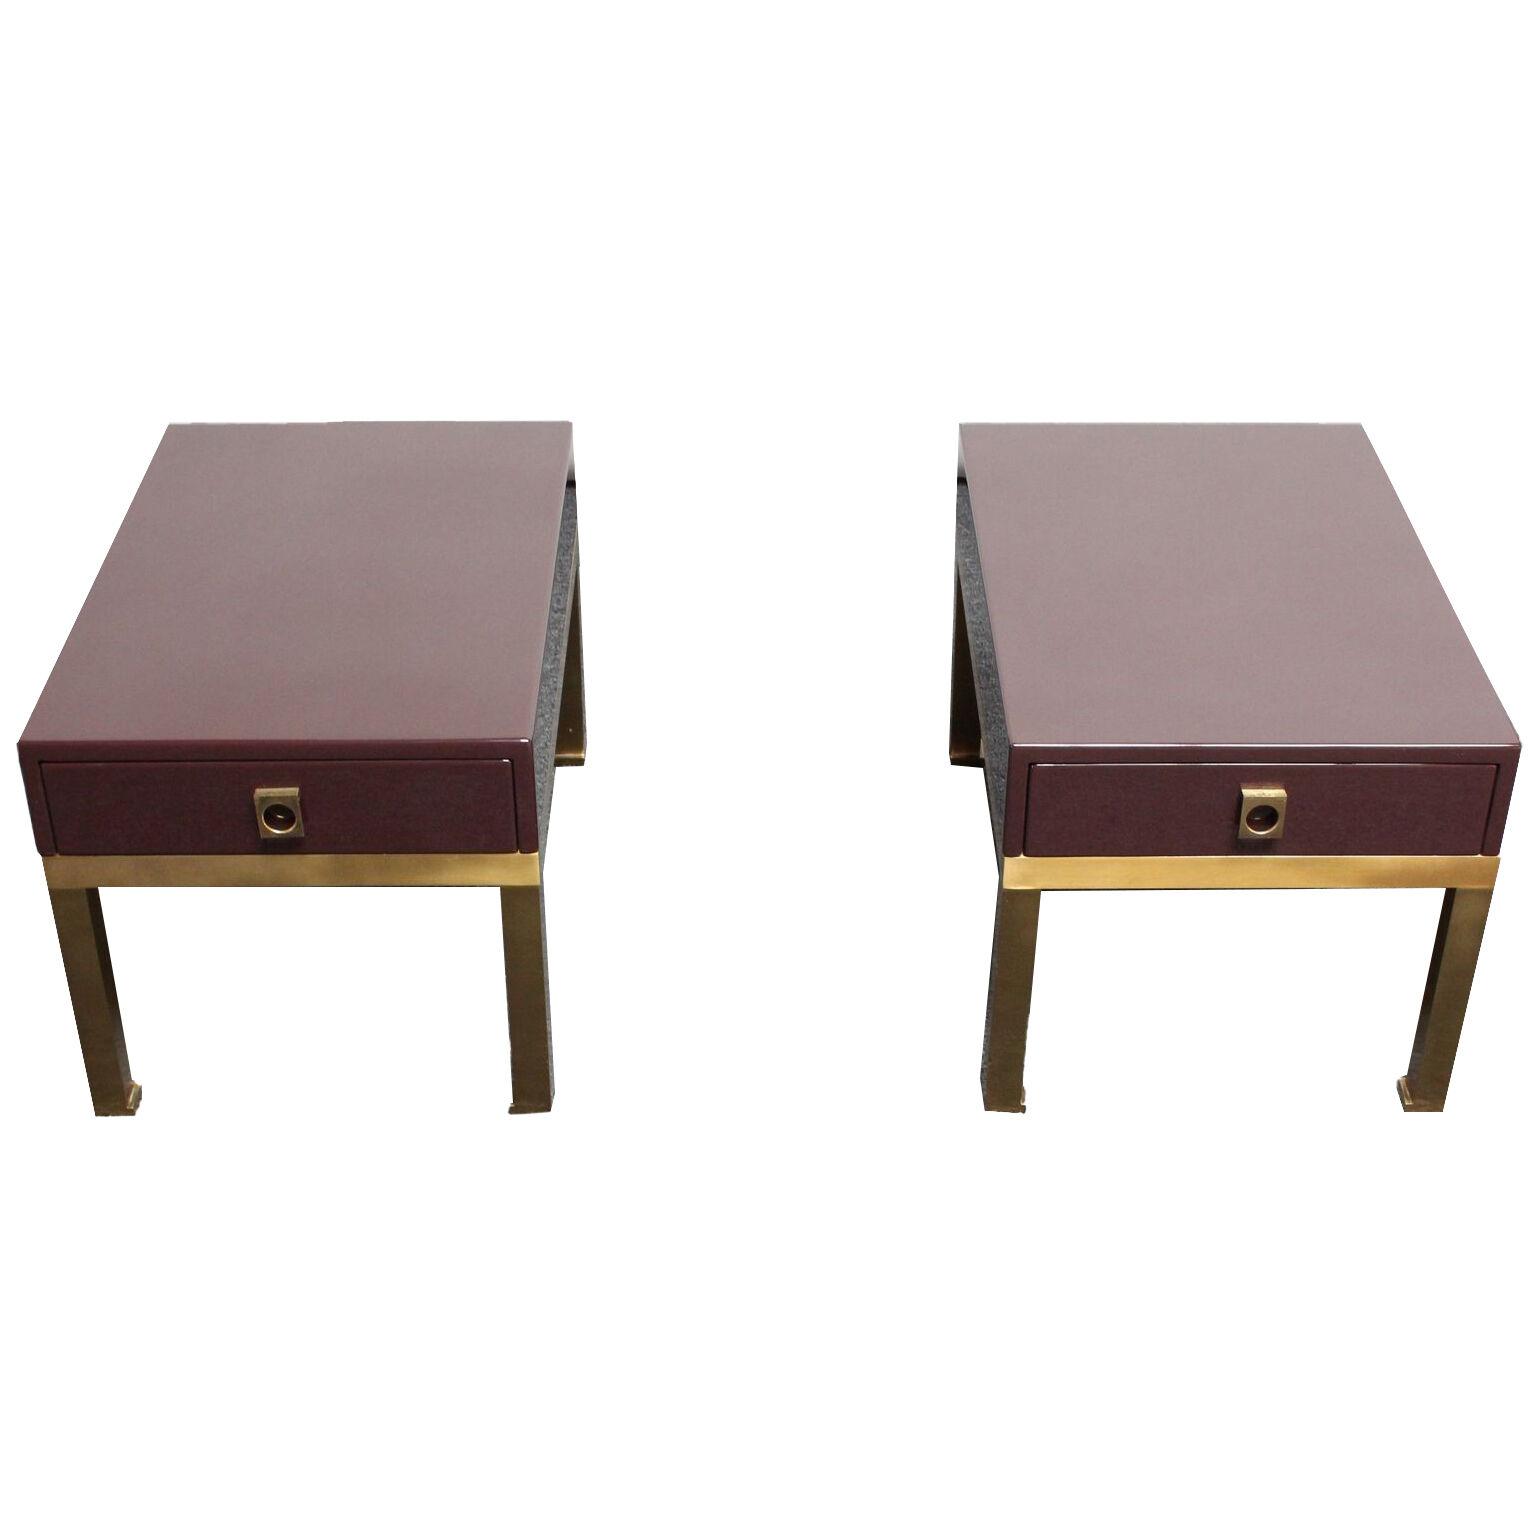 Pair of French Moderne Lacquered Mahogany and Brass Low Nightstands by Guy Lefè